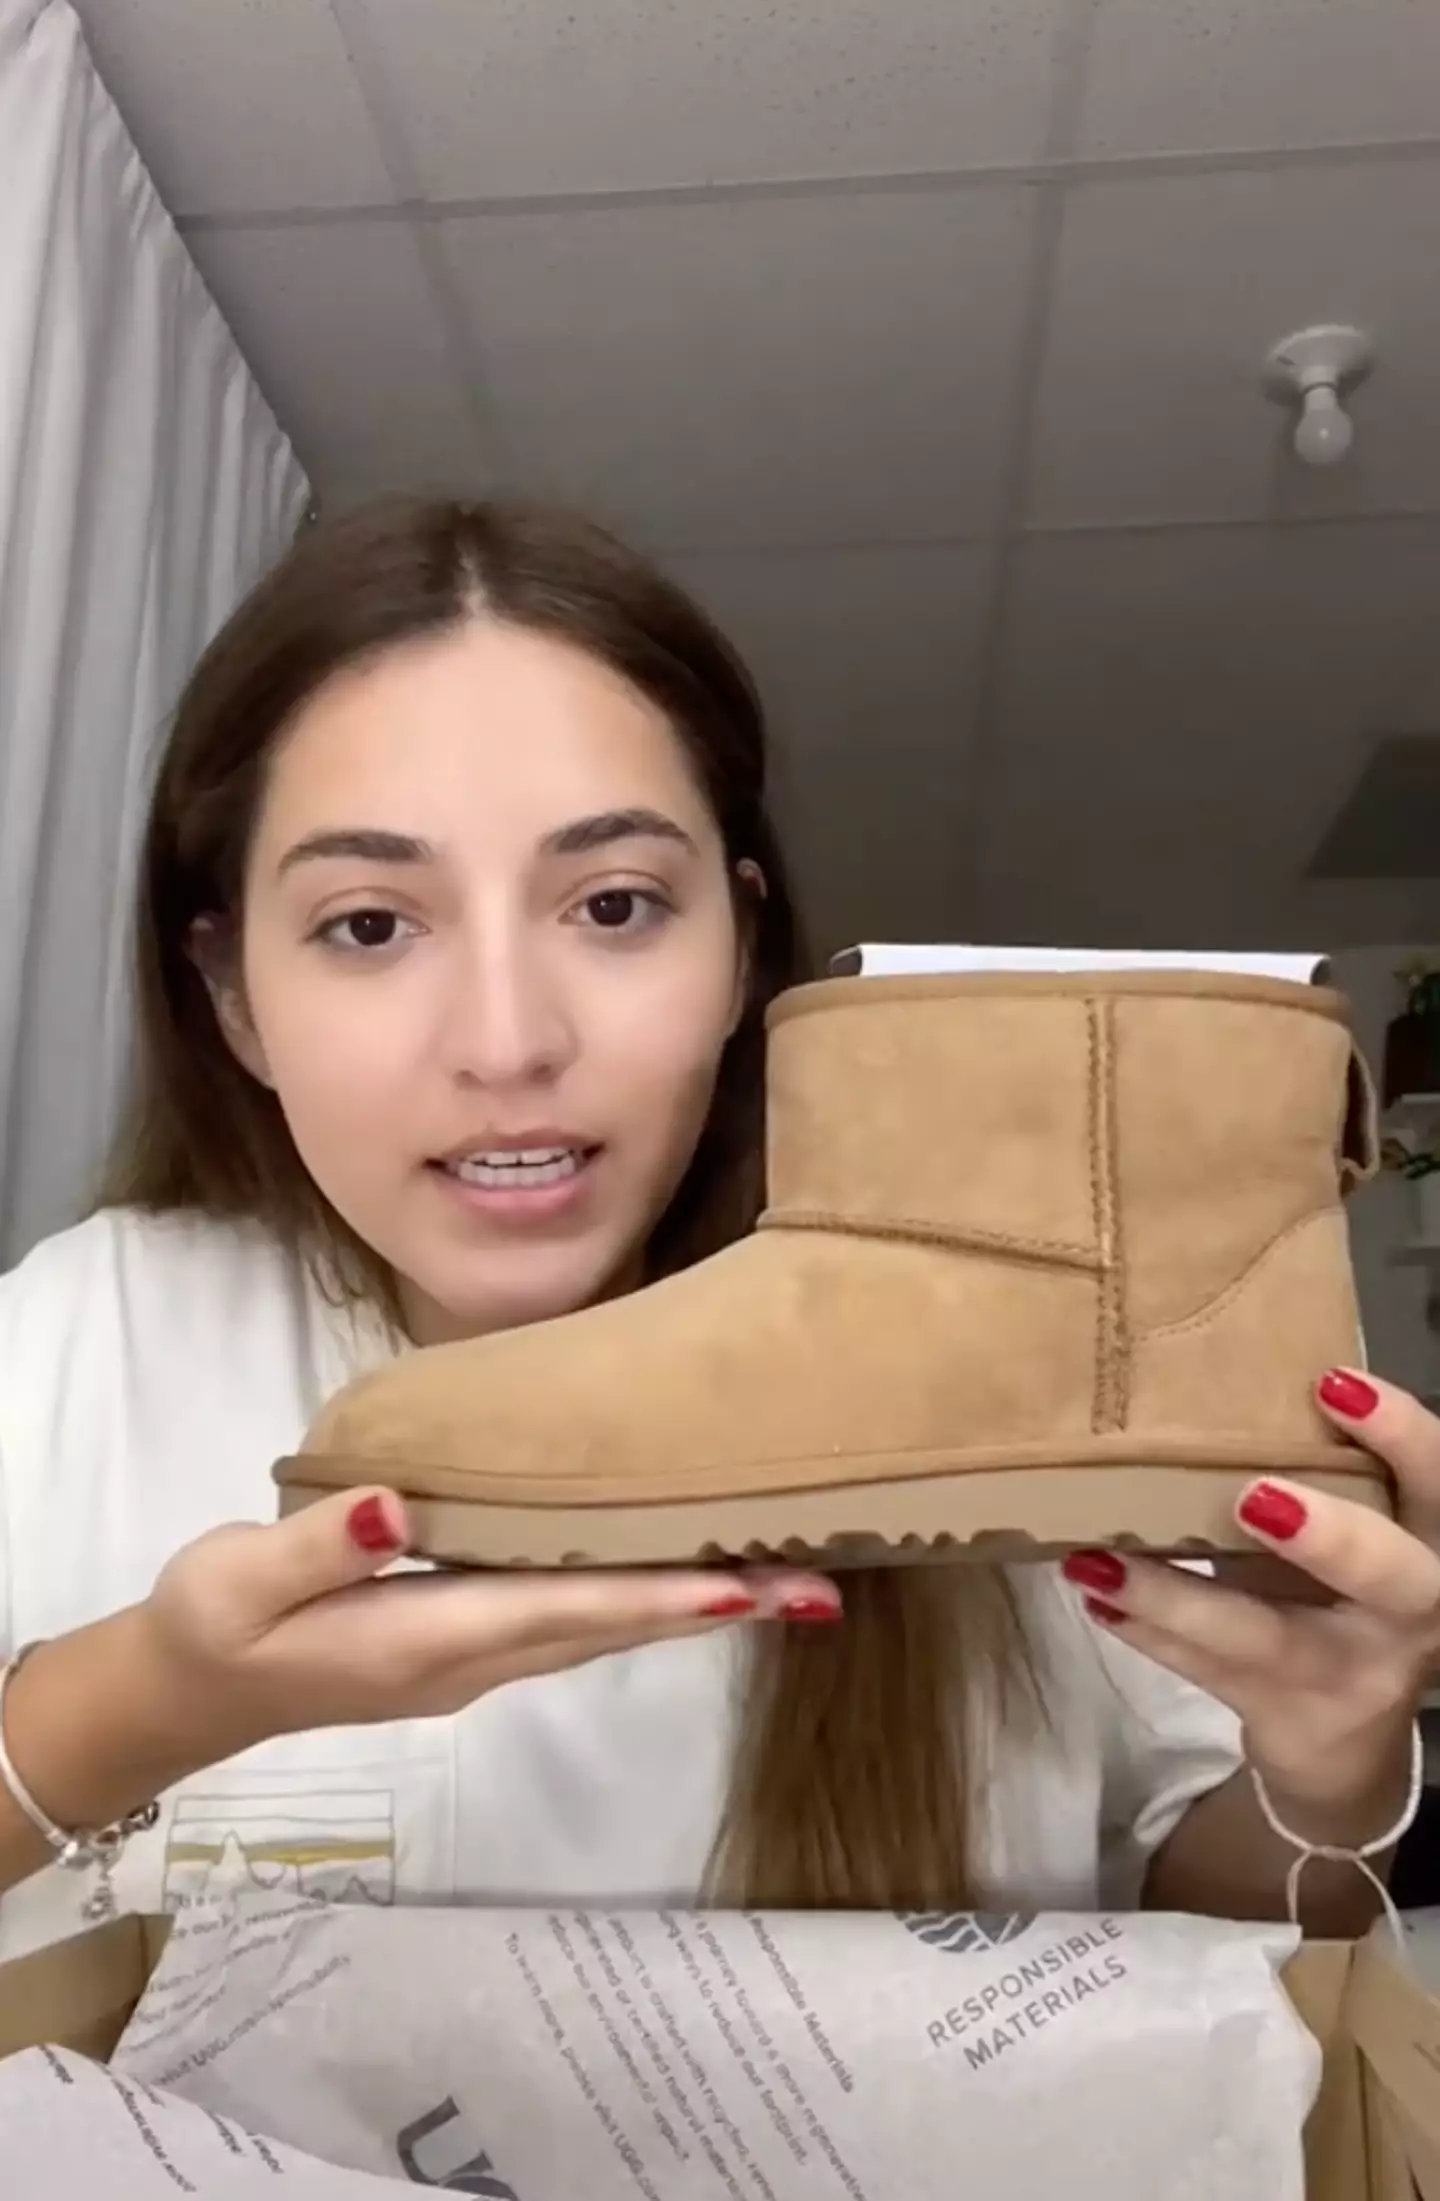 One woman has revealed what 'nobody tells you' about buying cheaper Ugg boots.